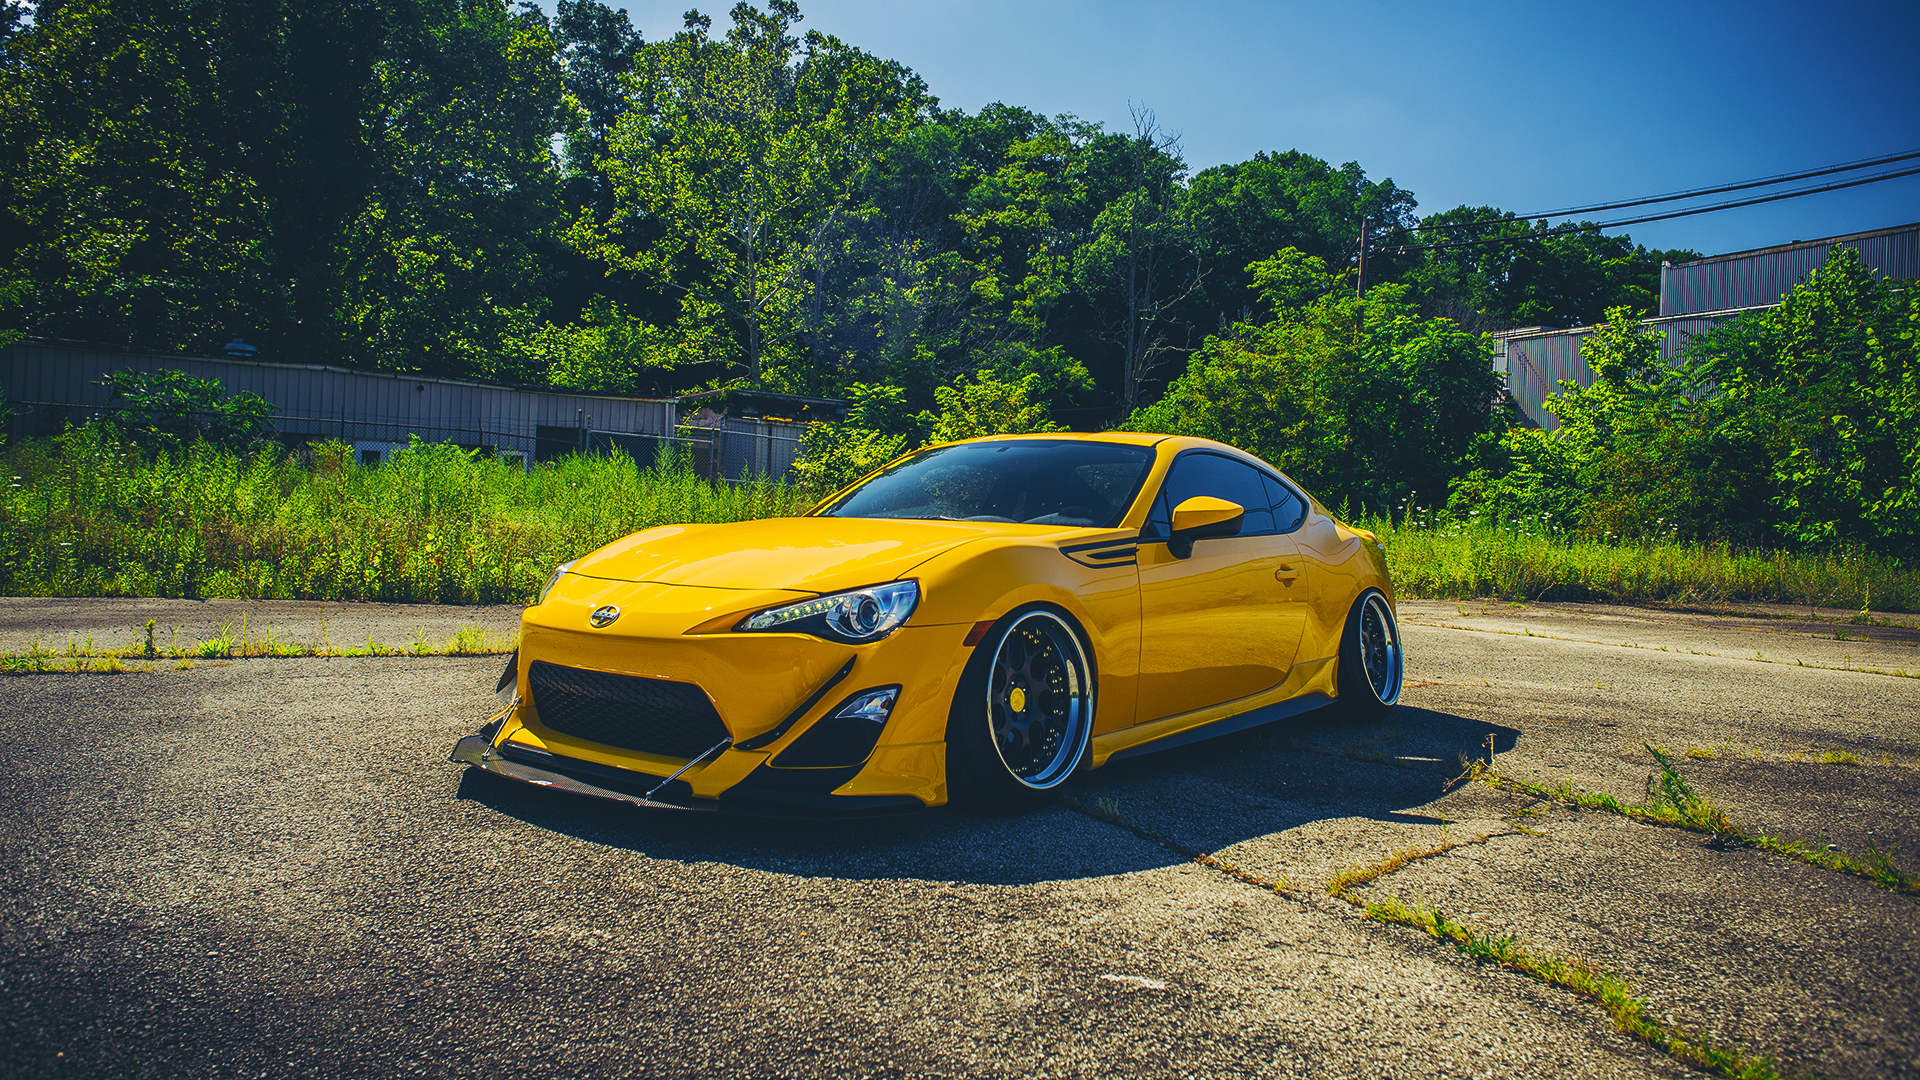 Scion FRS Stance Wallpaper | HD Car Wallpapers | ID #56671920 x 1080